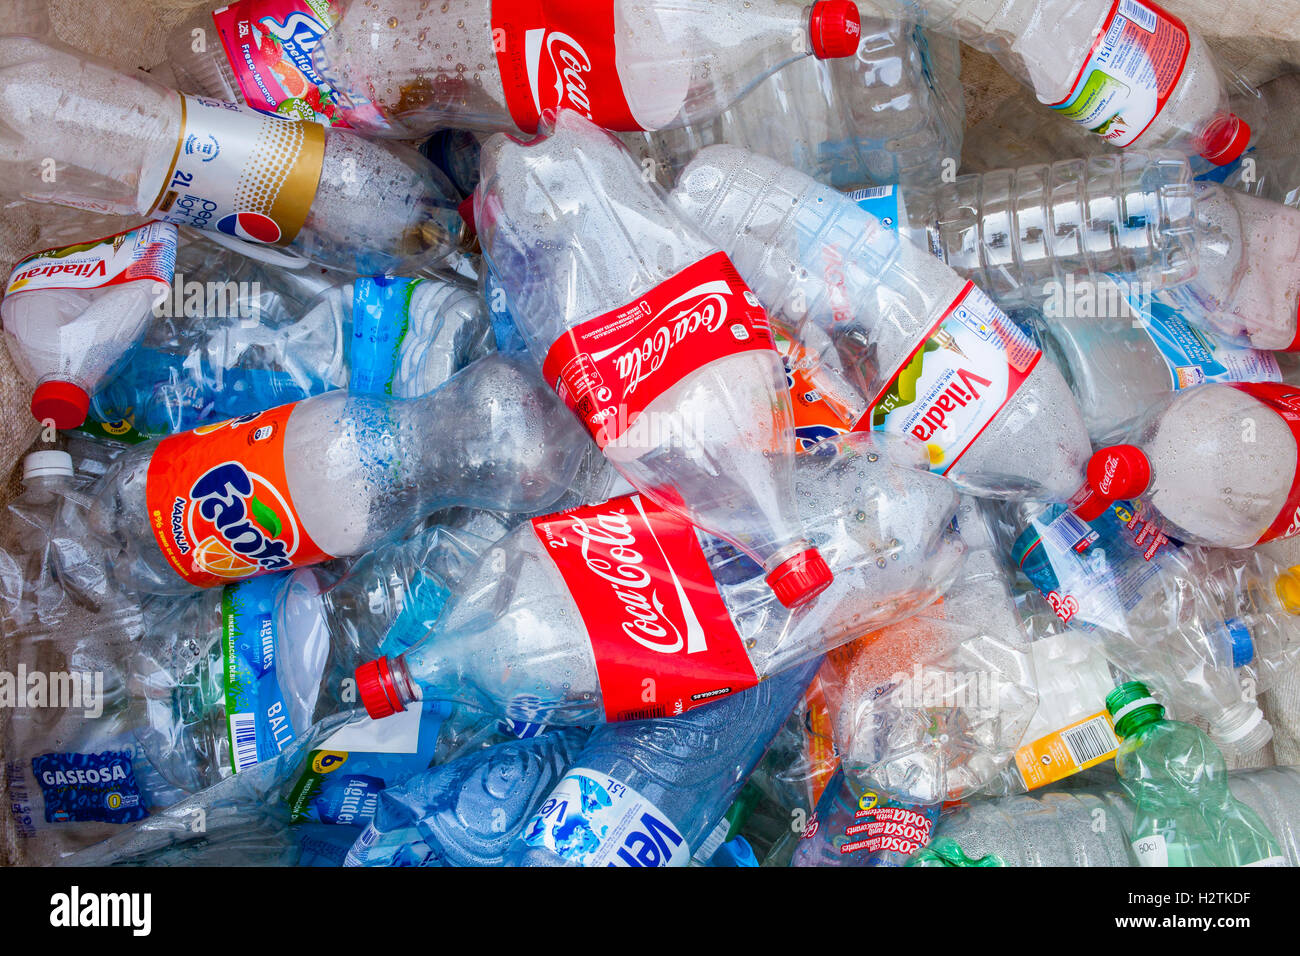 Used plastic bottles storage to recycle,recycling center Stock Photo